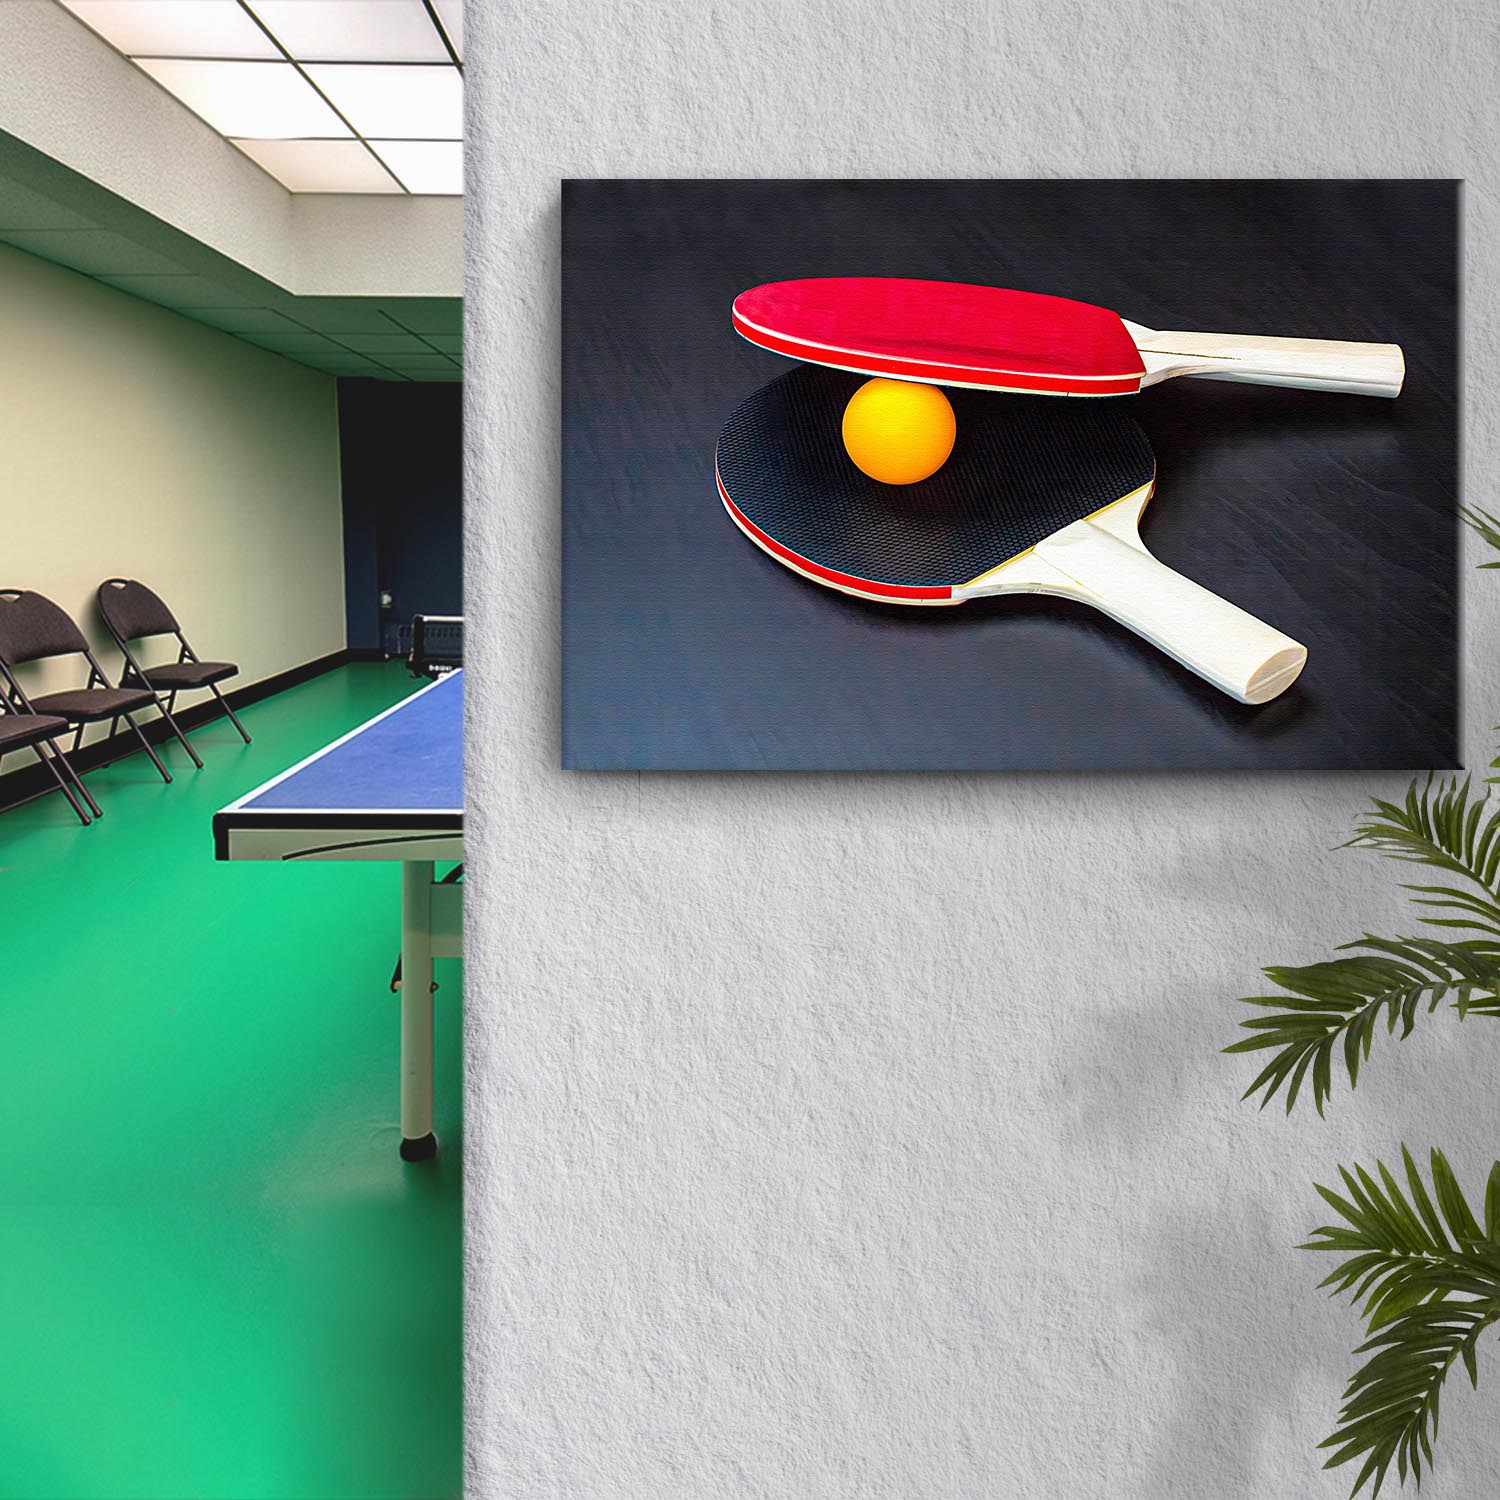 Table Tennis Paddles And Ball Canvas Wall Art Style 1 - Image by Tailored Canvases